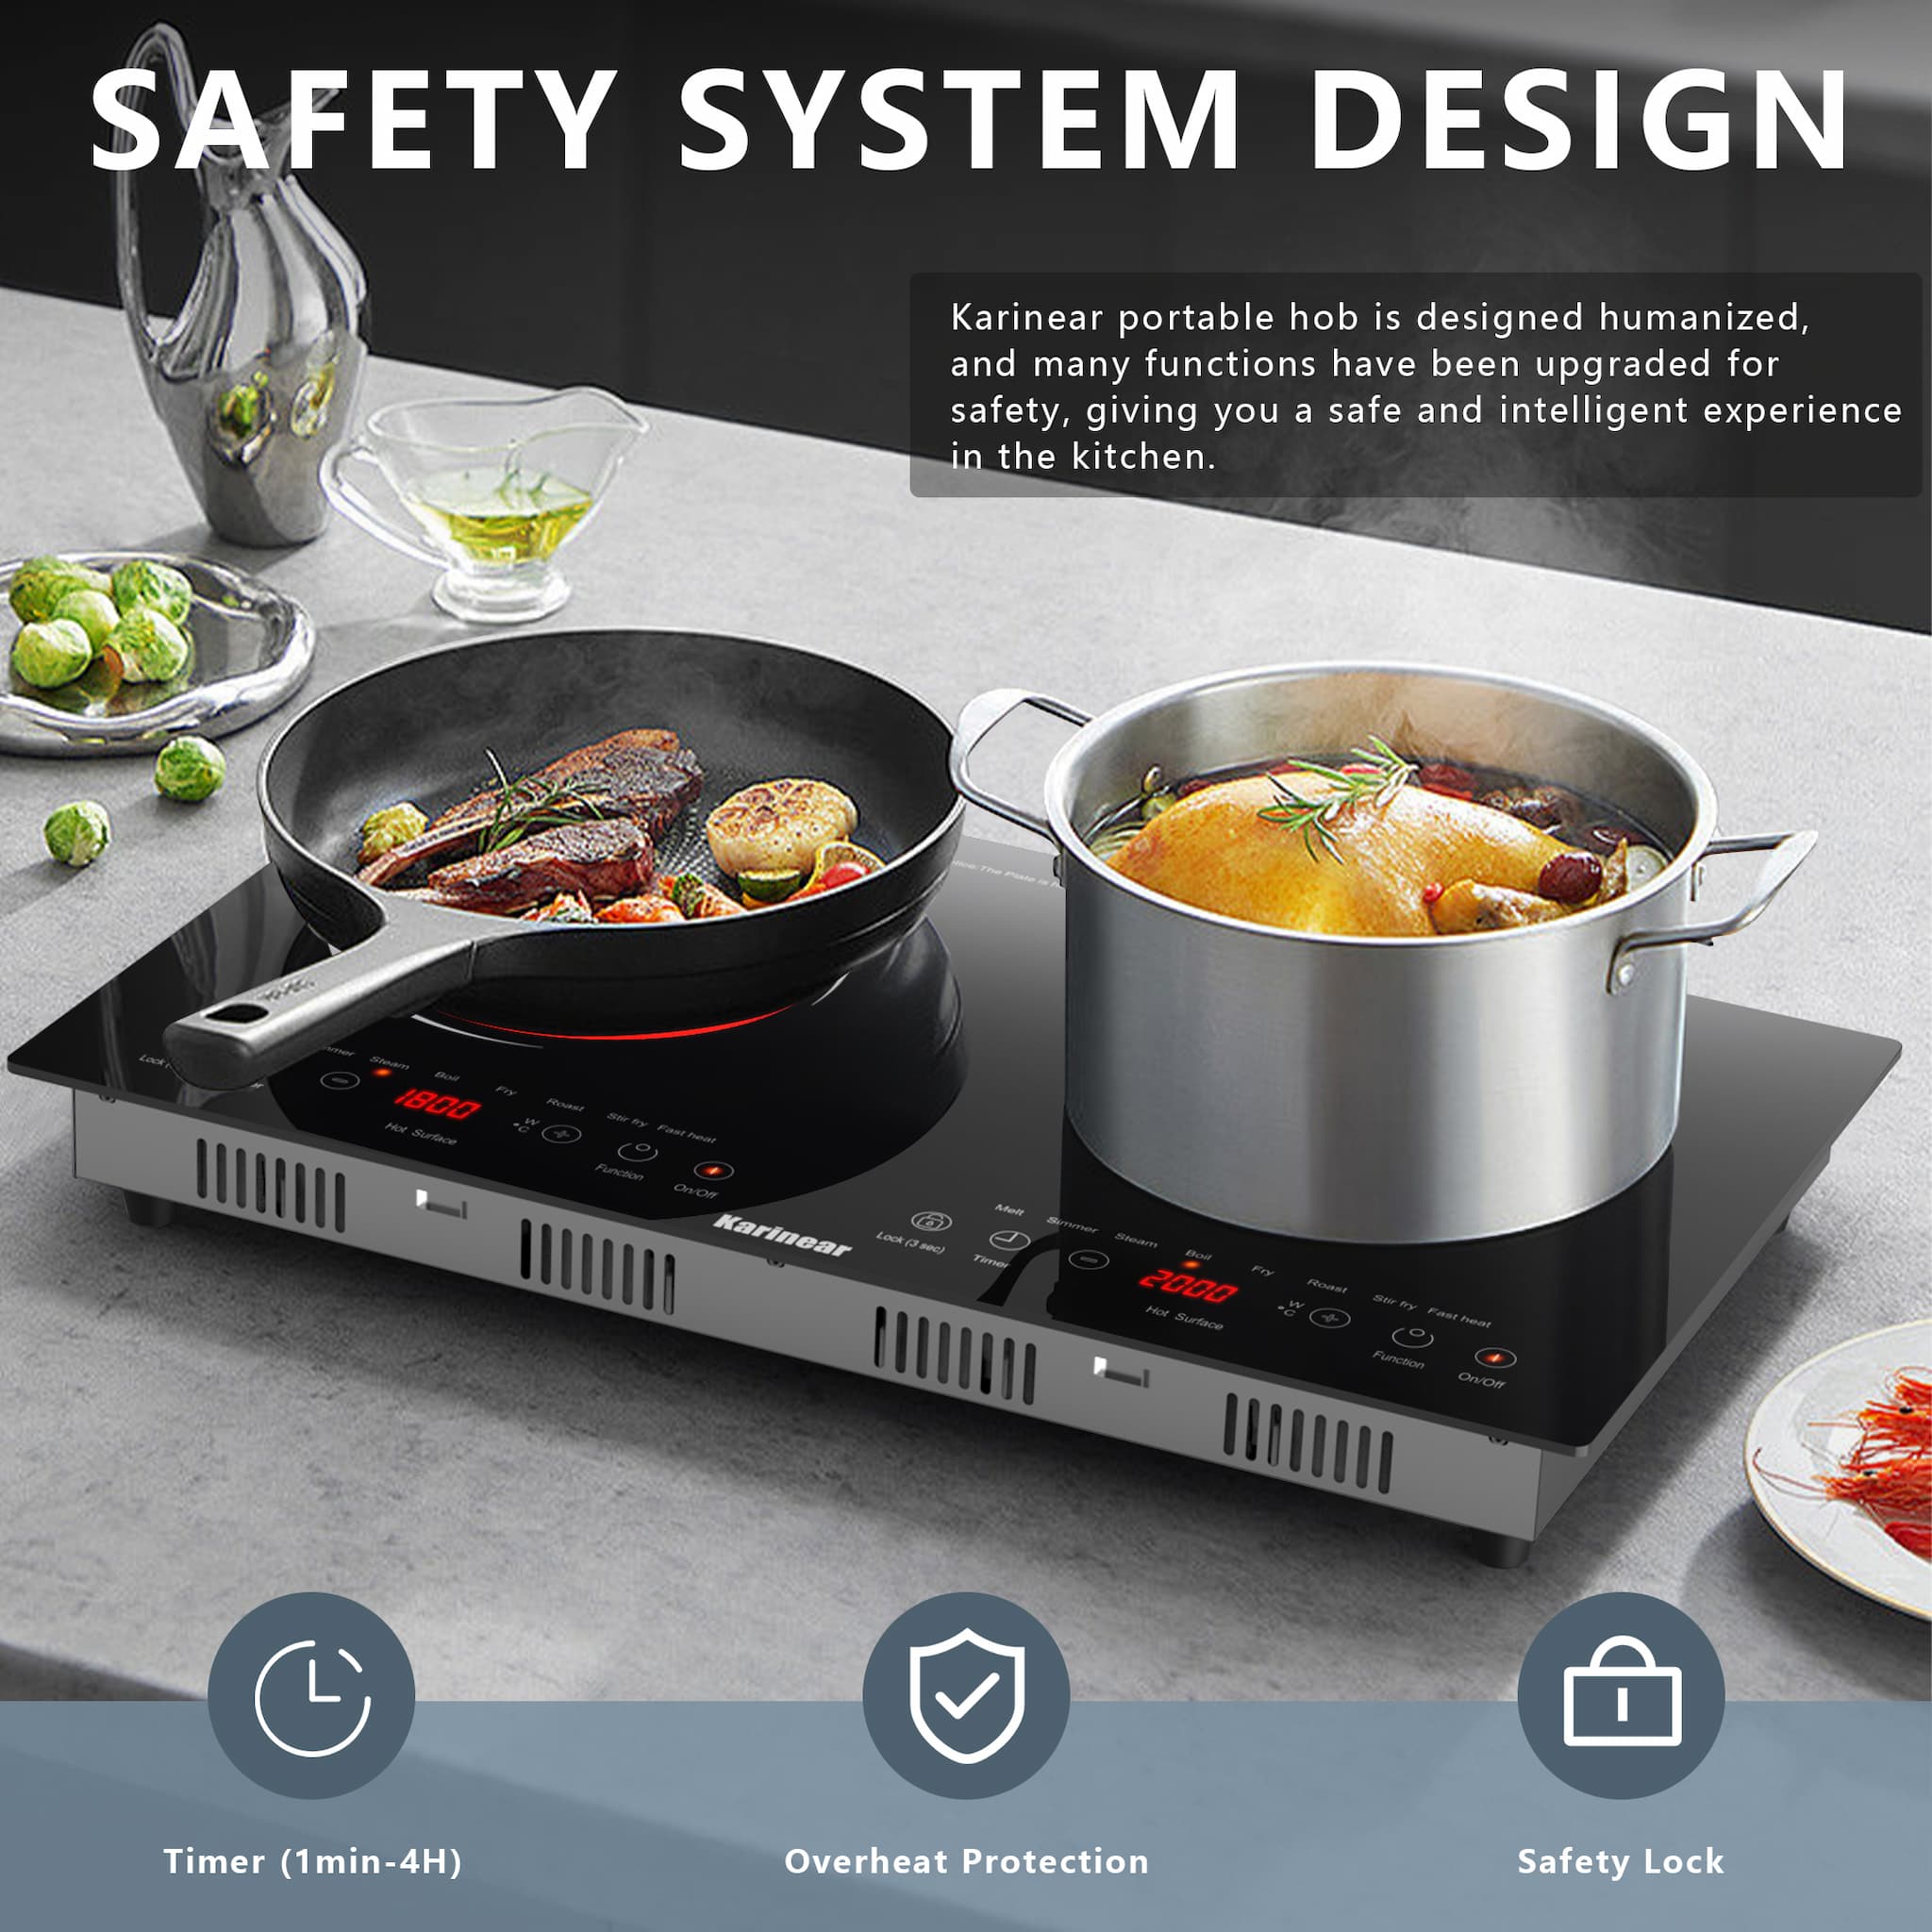 It's a drop-in electric cooktop, but you can also use it on the countertop for it has 4 bottom brackets. Because it has plug and brackets, you can move it anywhere to use. It's a portable electric cooktop.